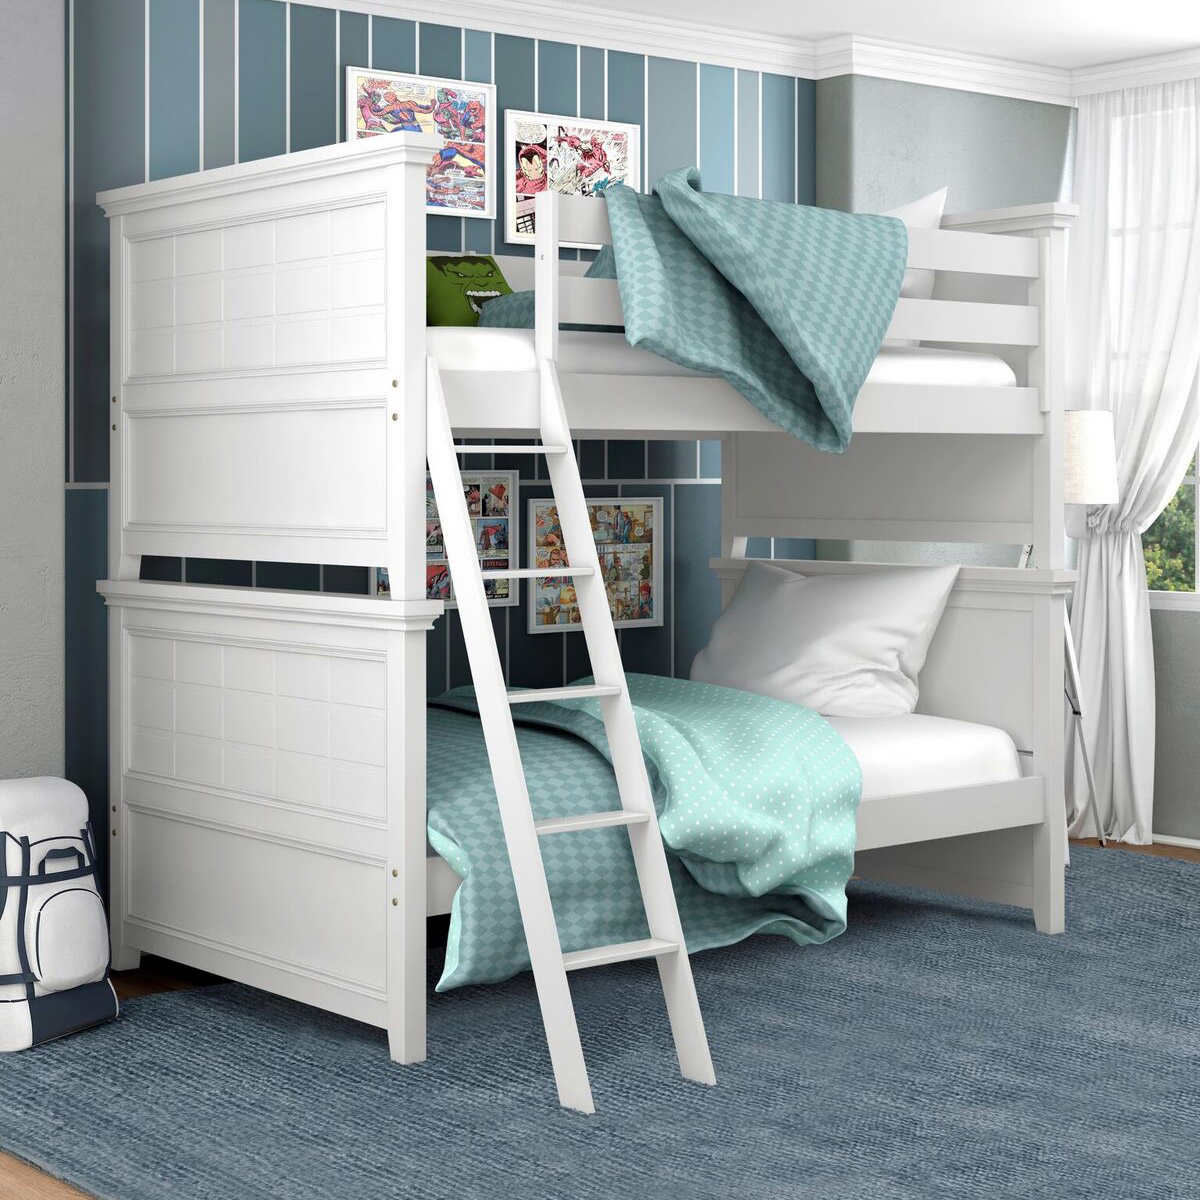 Beckham Full Over Bunkbed Costco, 2 Full Size Bunk Beds